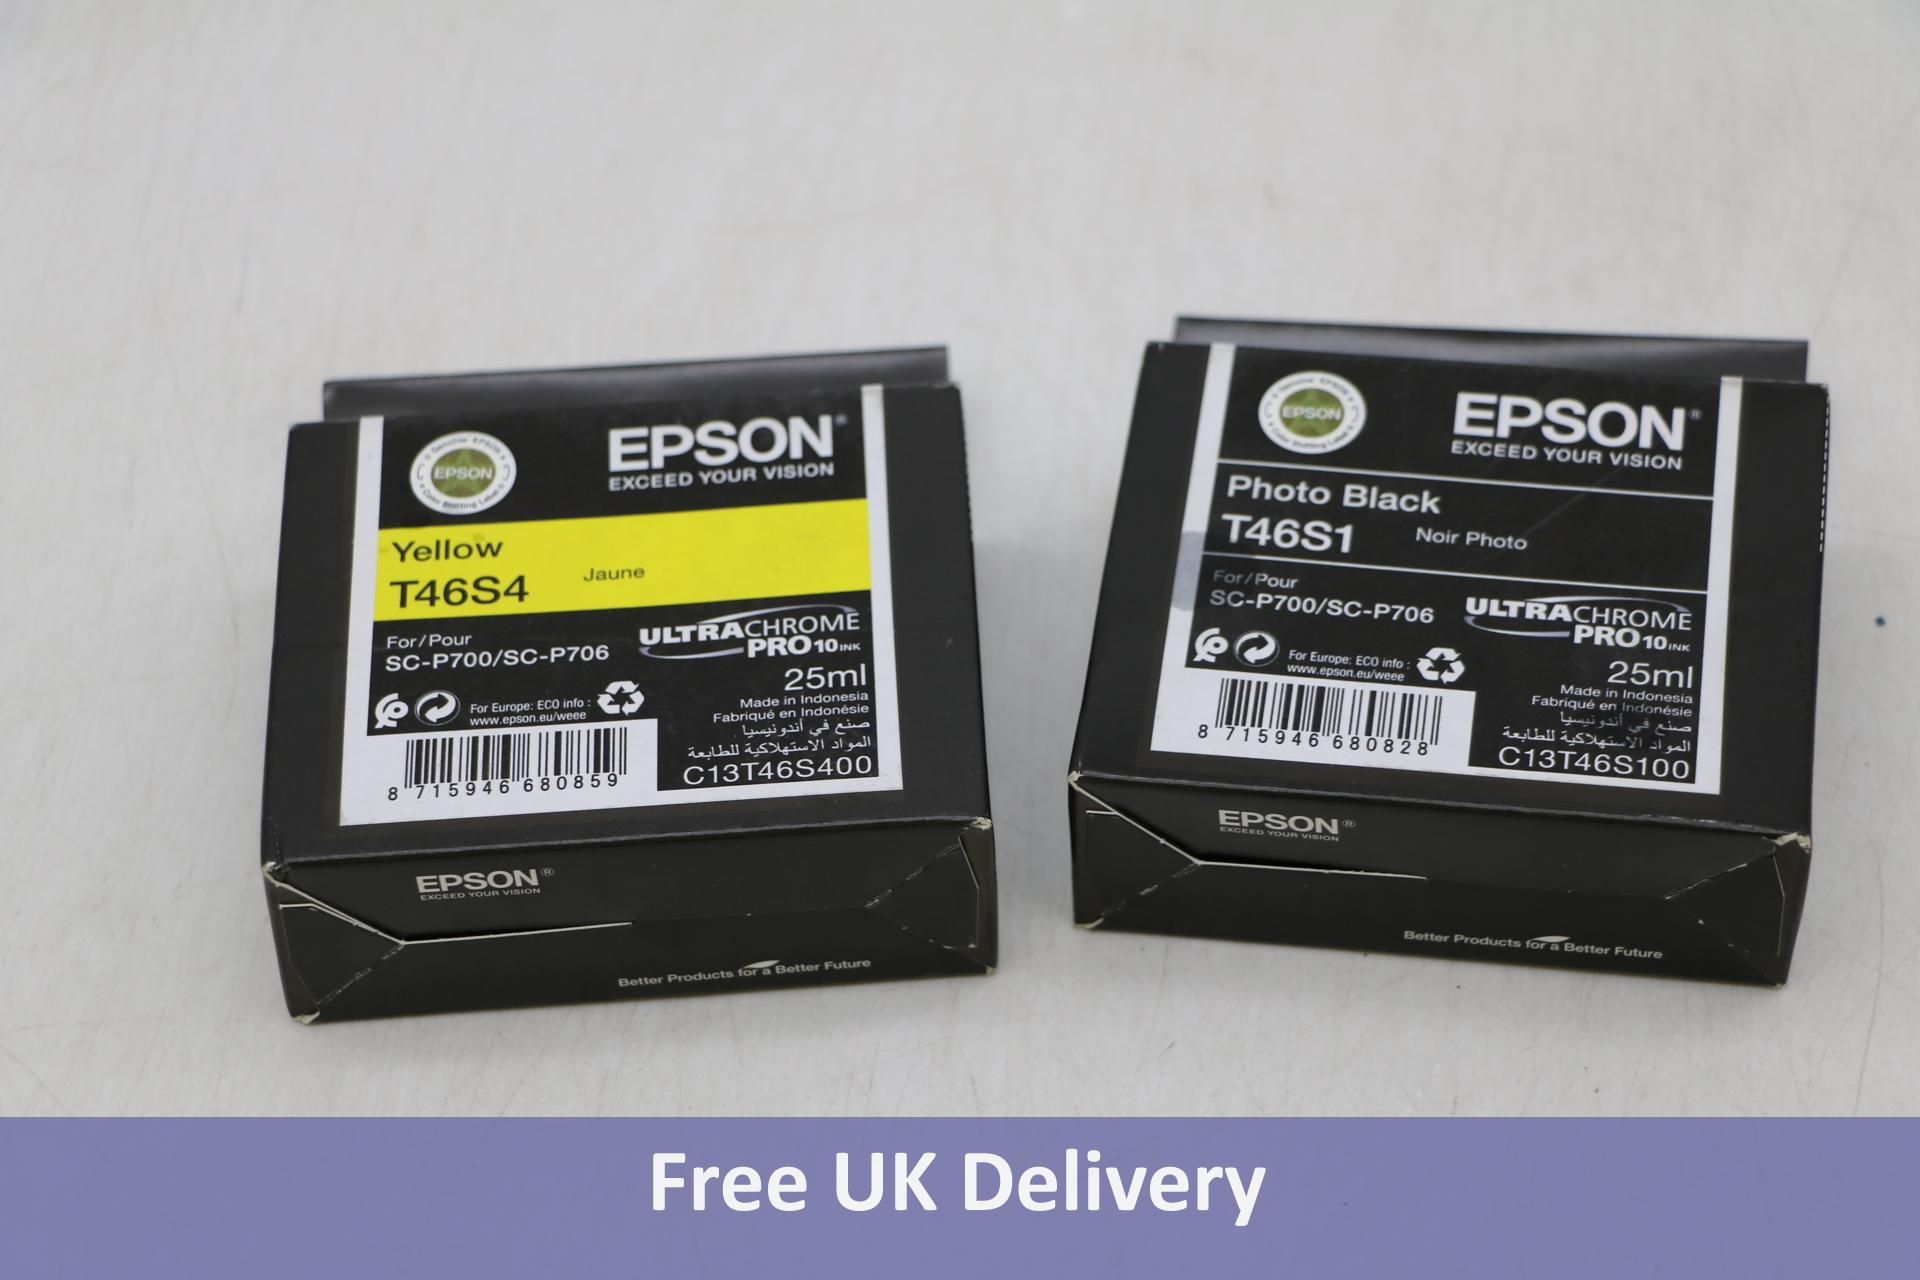 Two Epson UltraChrome Pro 10 Ink 1x Yellow T46S4, and 1x Phone Black T46S1, Both 25ml